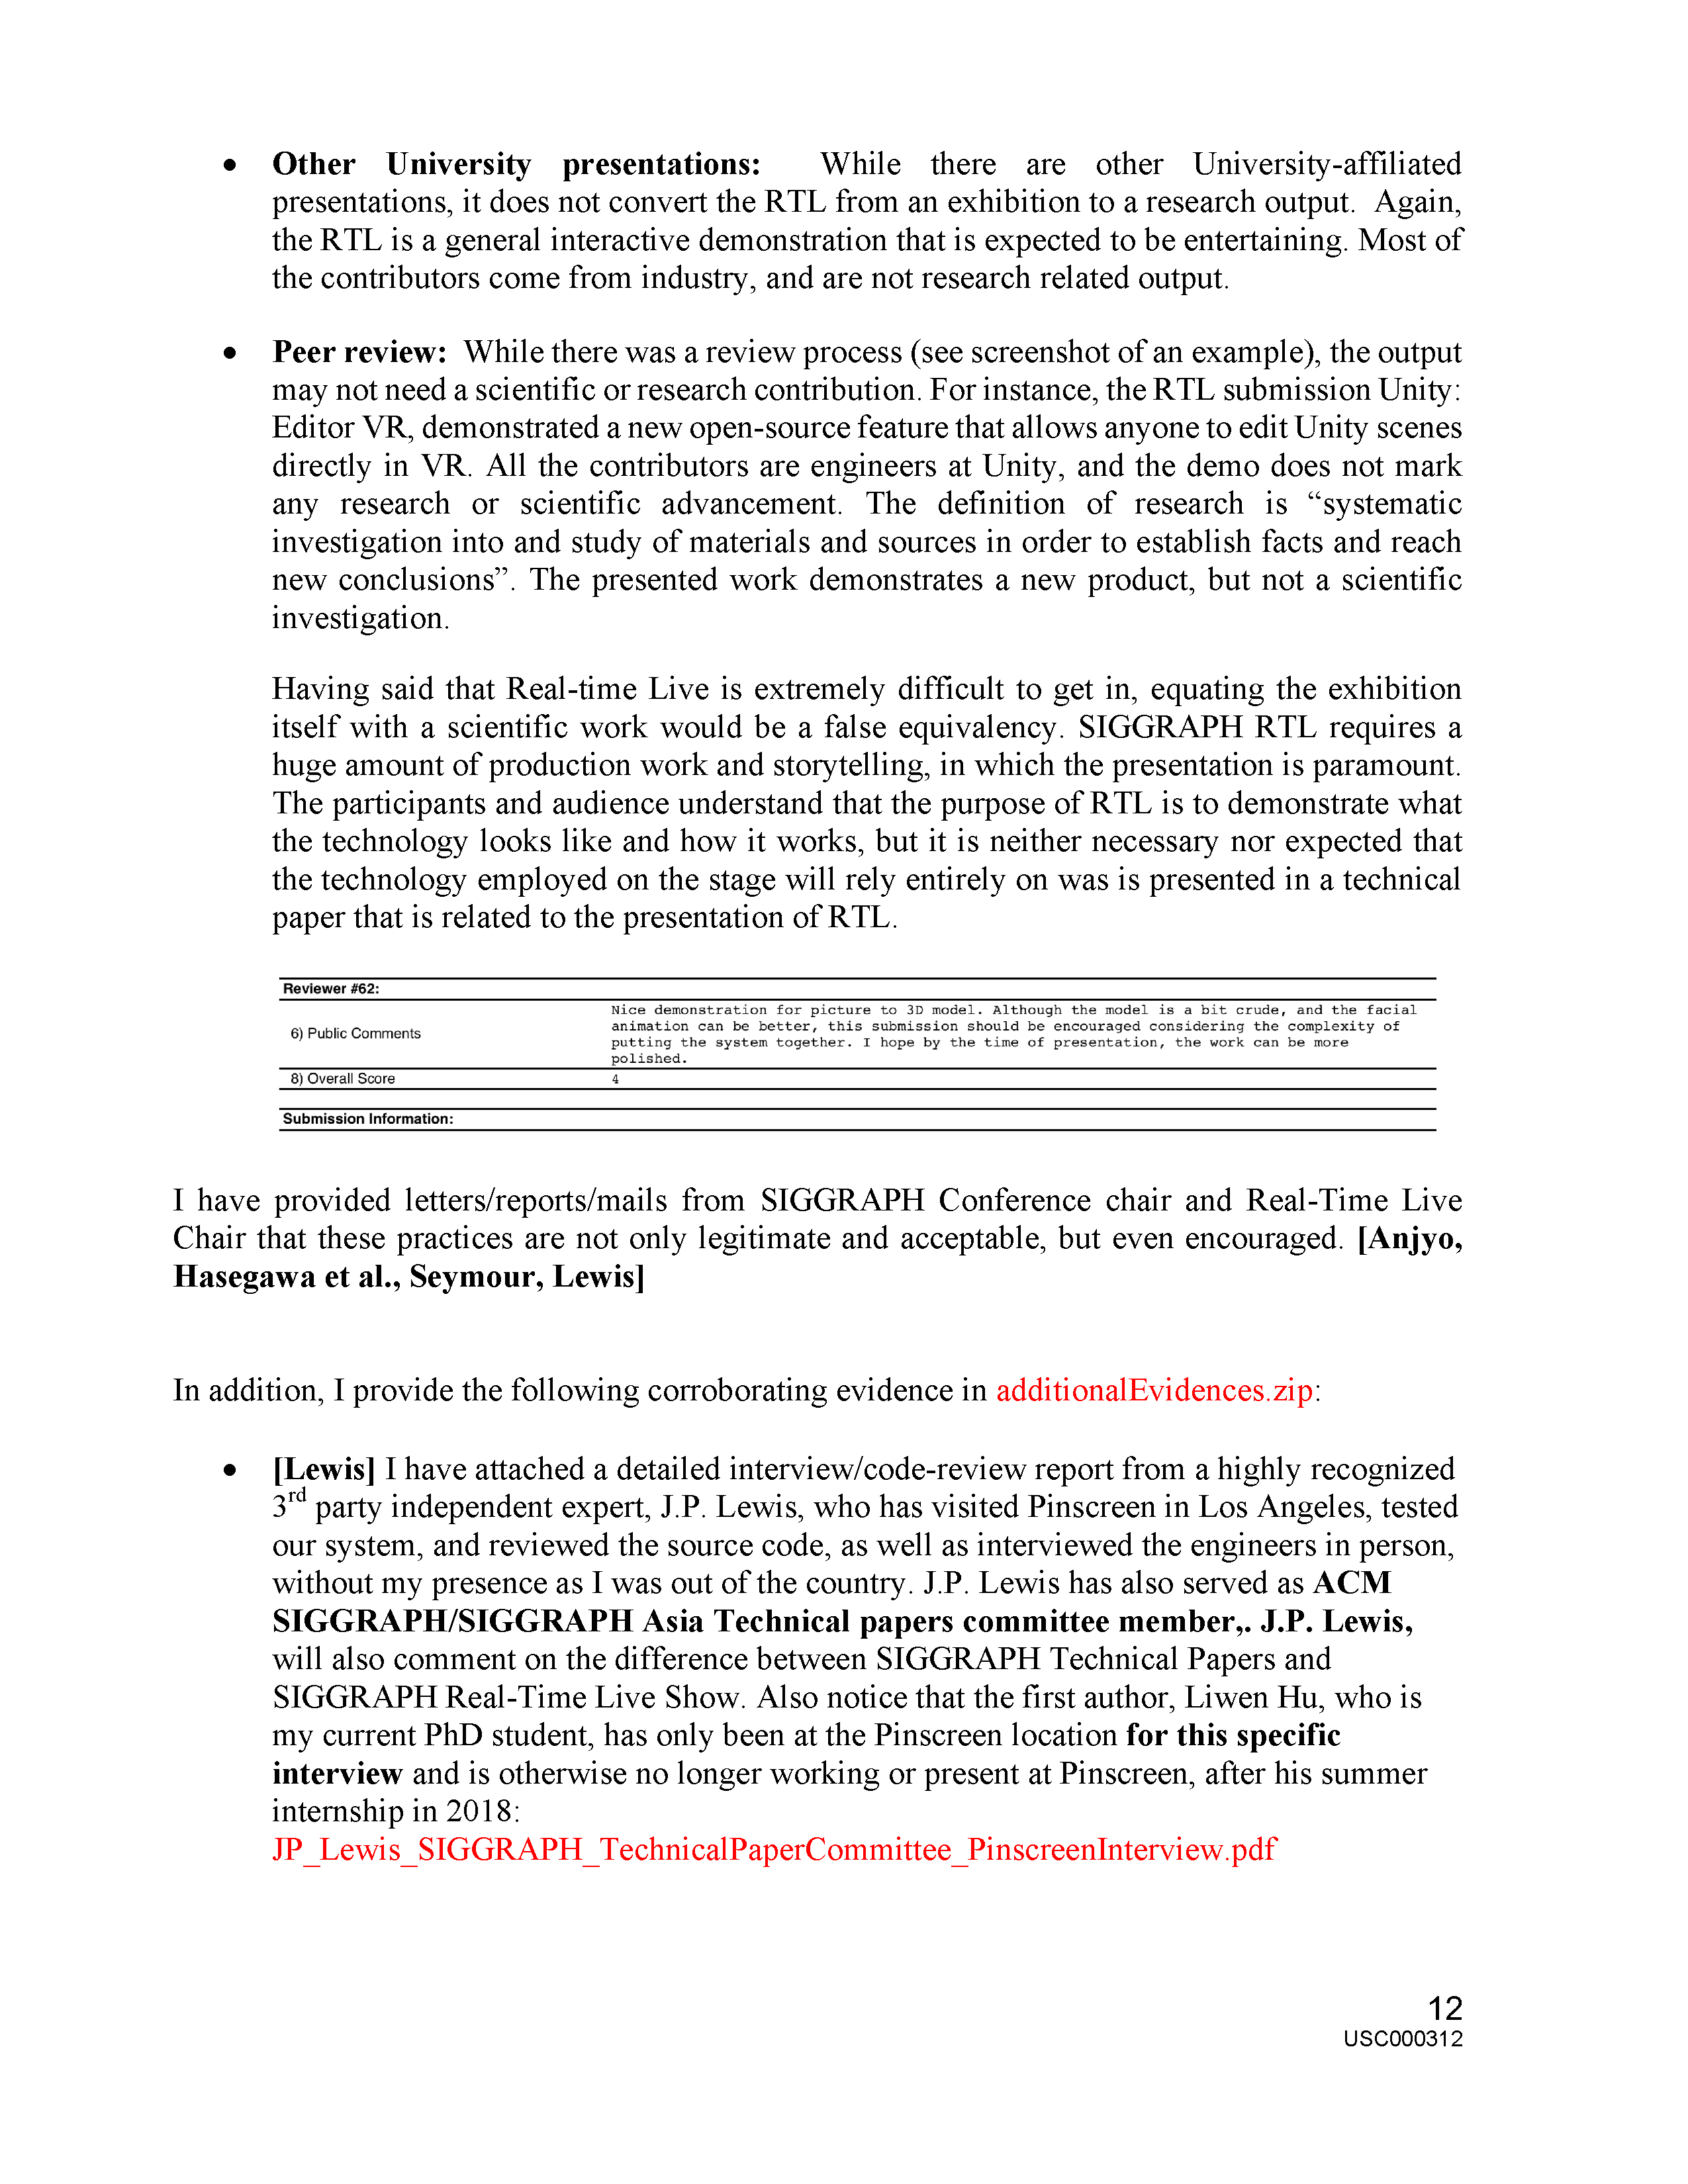 USC's Investigation Report re Hao Li's and Pinscreen's Scientific Misconduct at ACM SIGGRAPH RTL 2017 - Summary Page 42